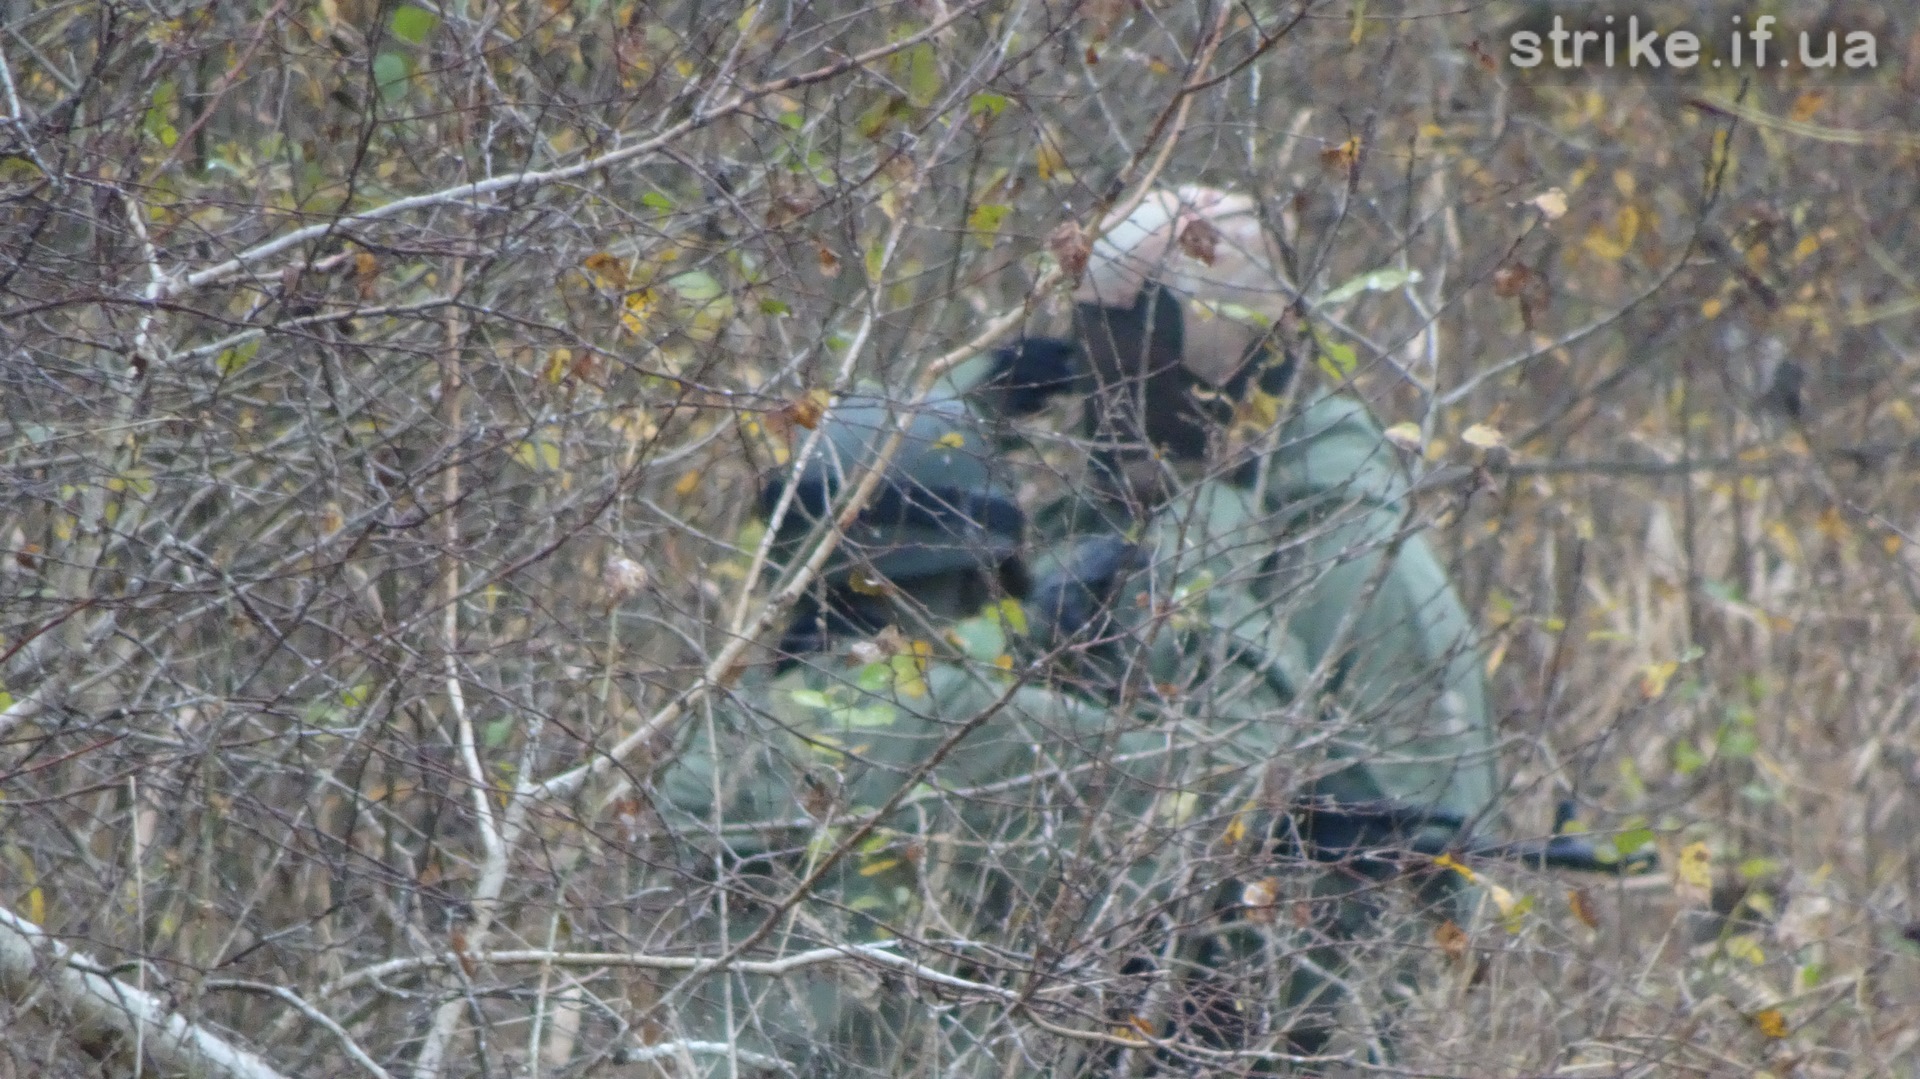 AIRSOFT GAME In Ivano-Frankivsk with an Owl airsoft club